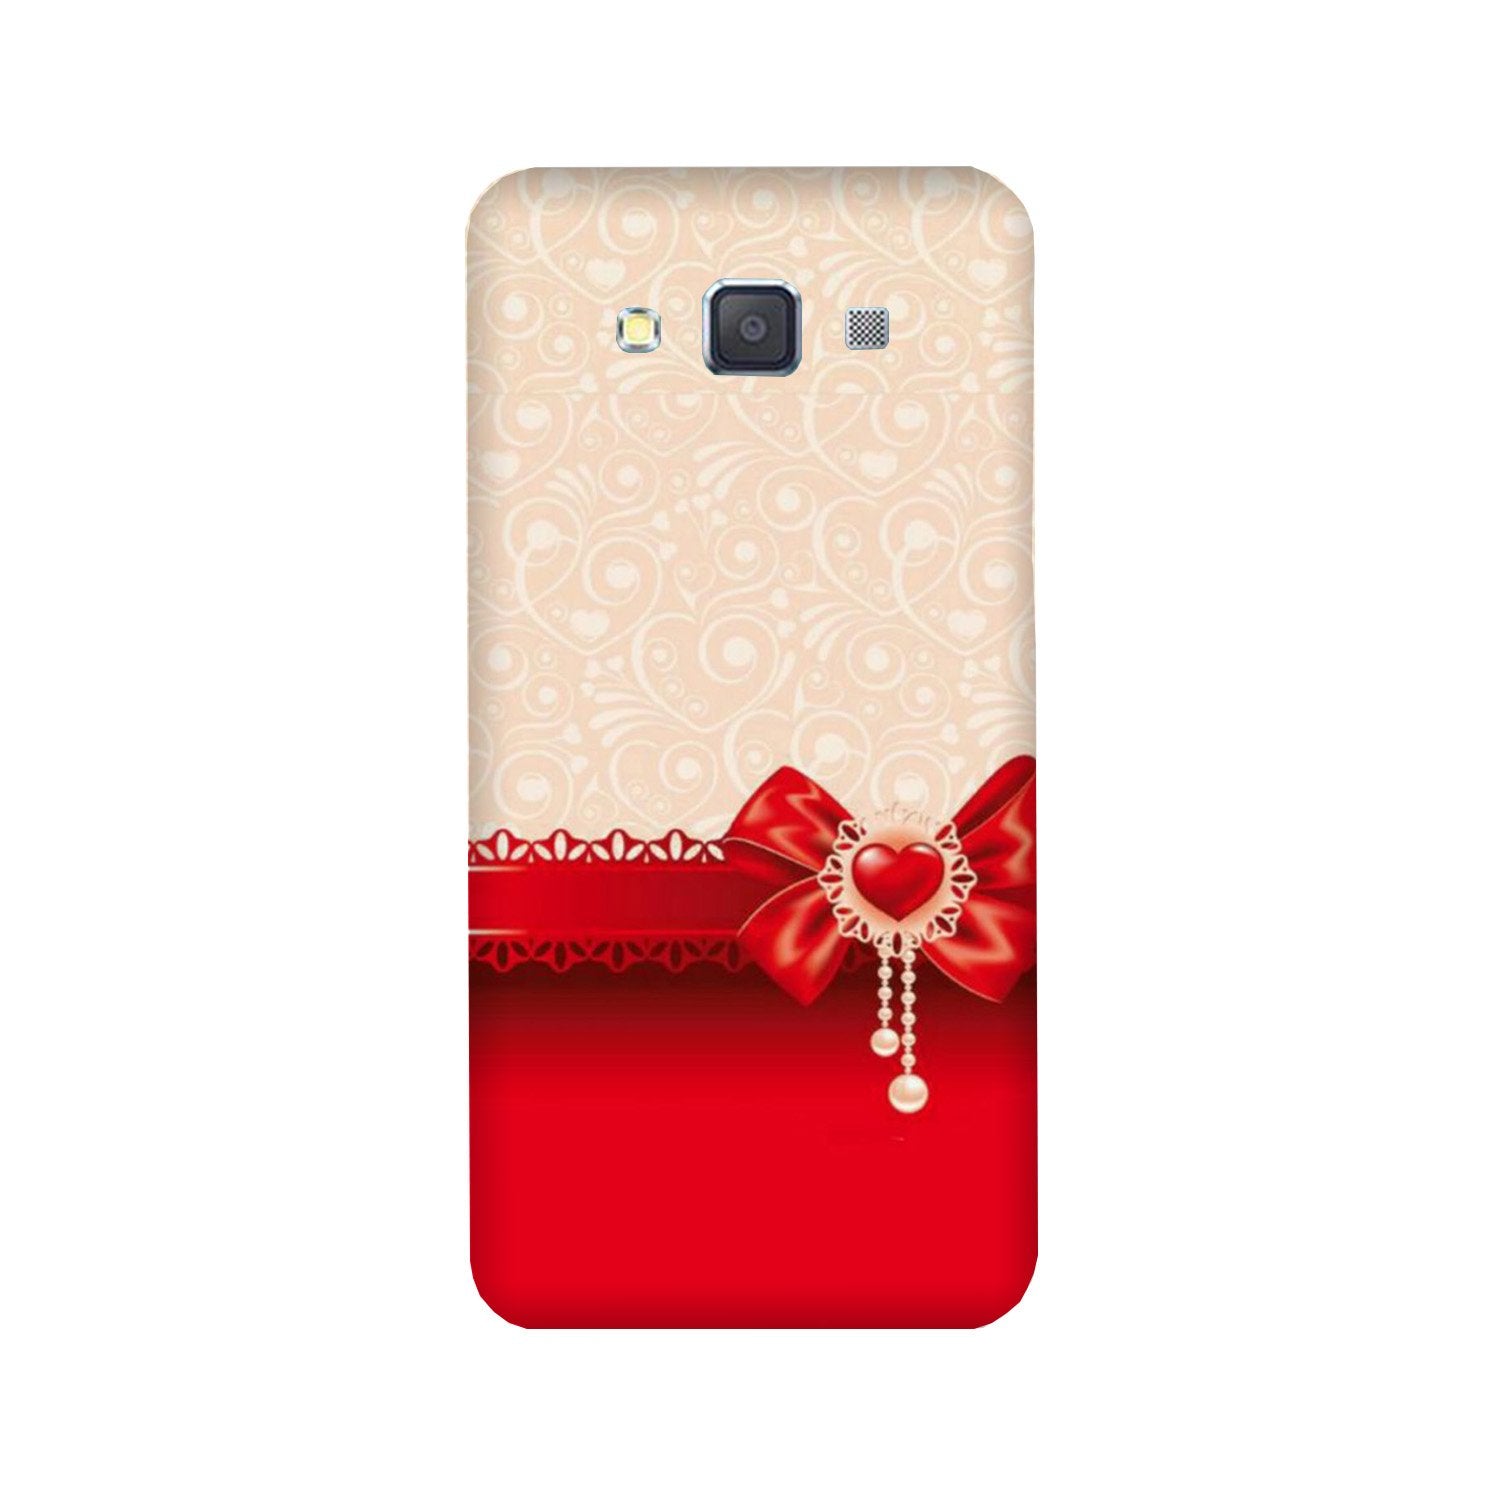 Gift Wrap3 Case for Galaxy Grand Max